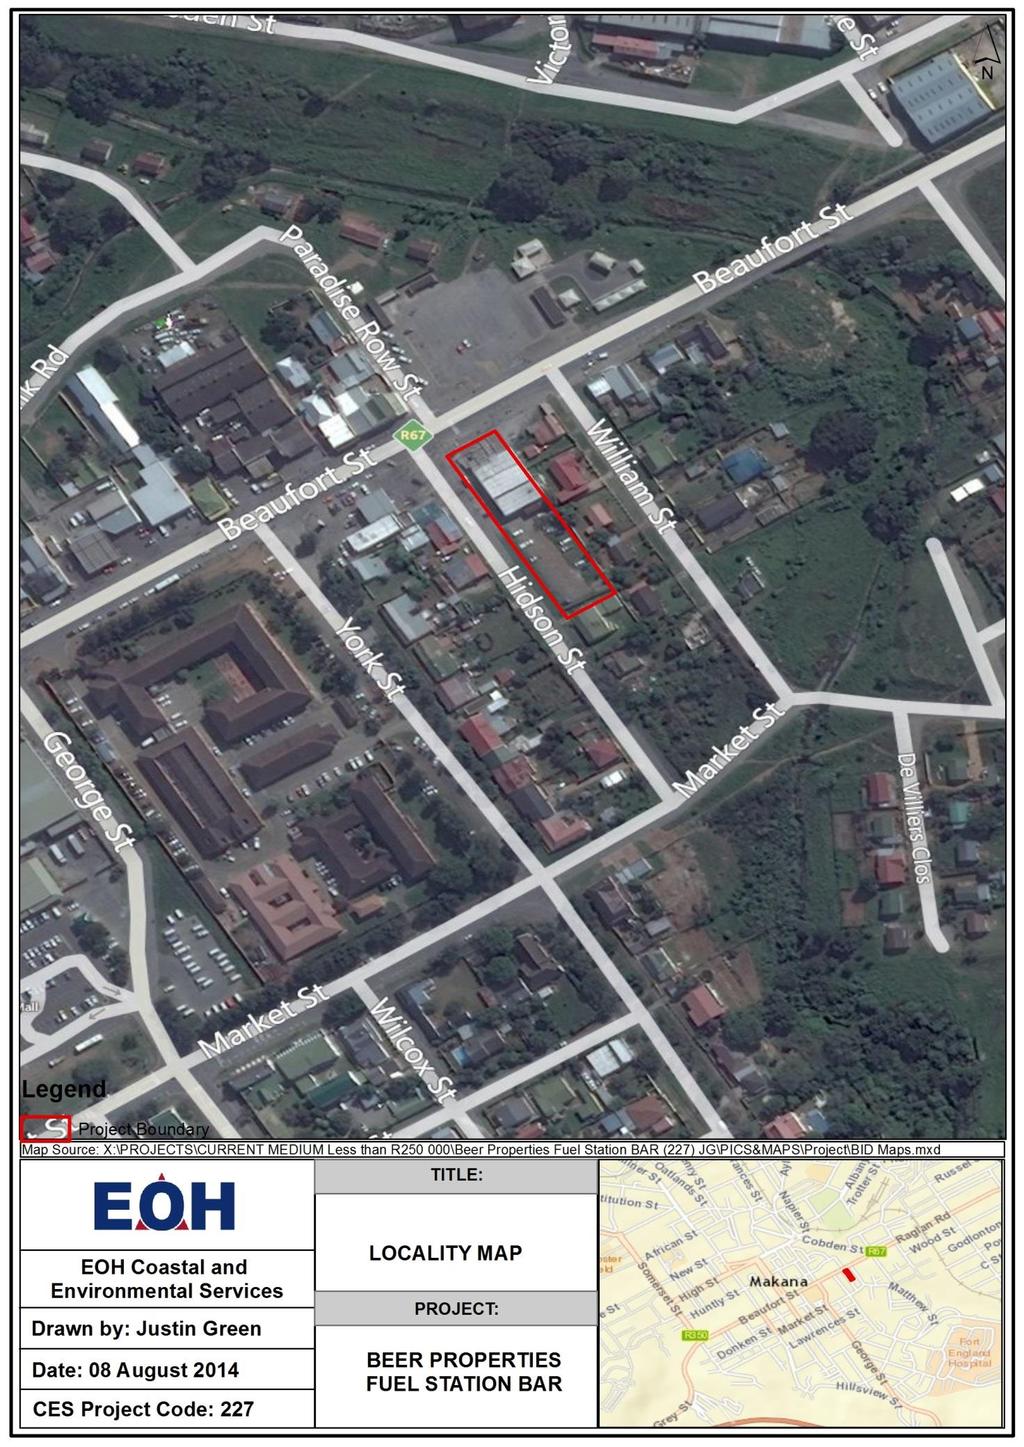 FIGURE 2: AERIAL OVERVIEW OF THE FUEL STATION LOCATION.